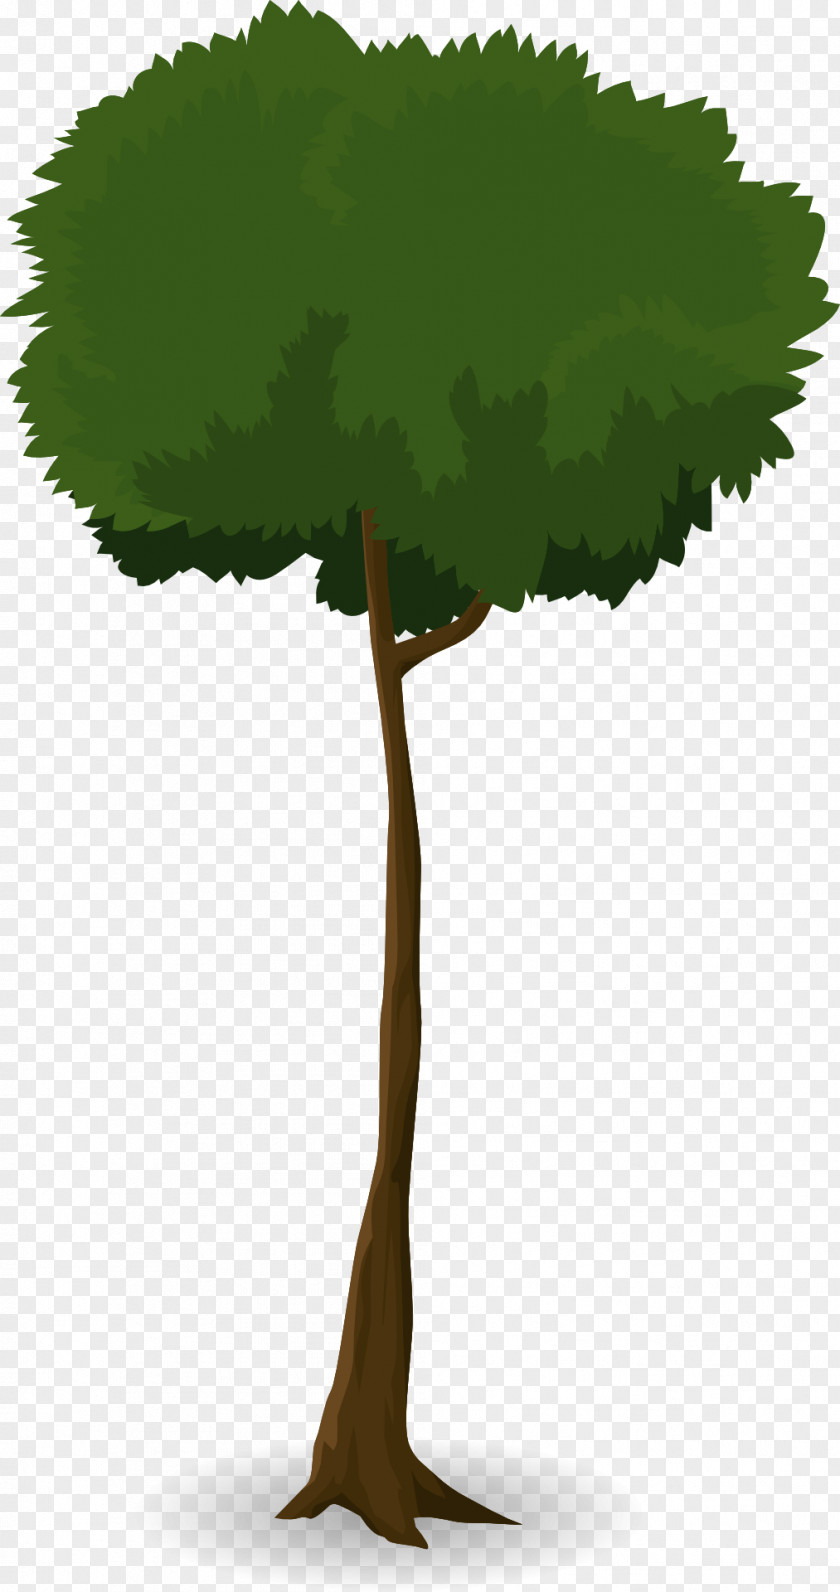 Tree Branch Leaf Trunk Canopy Plant PNG